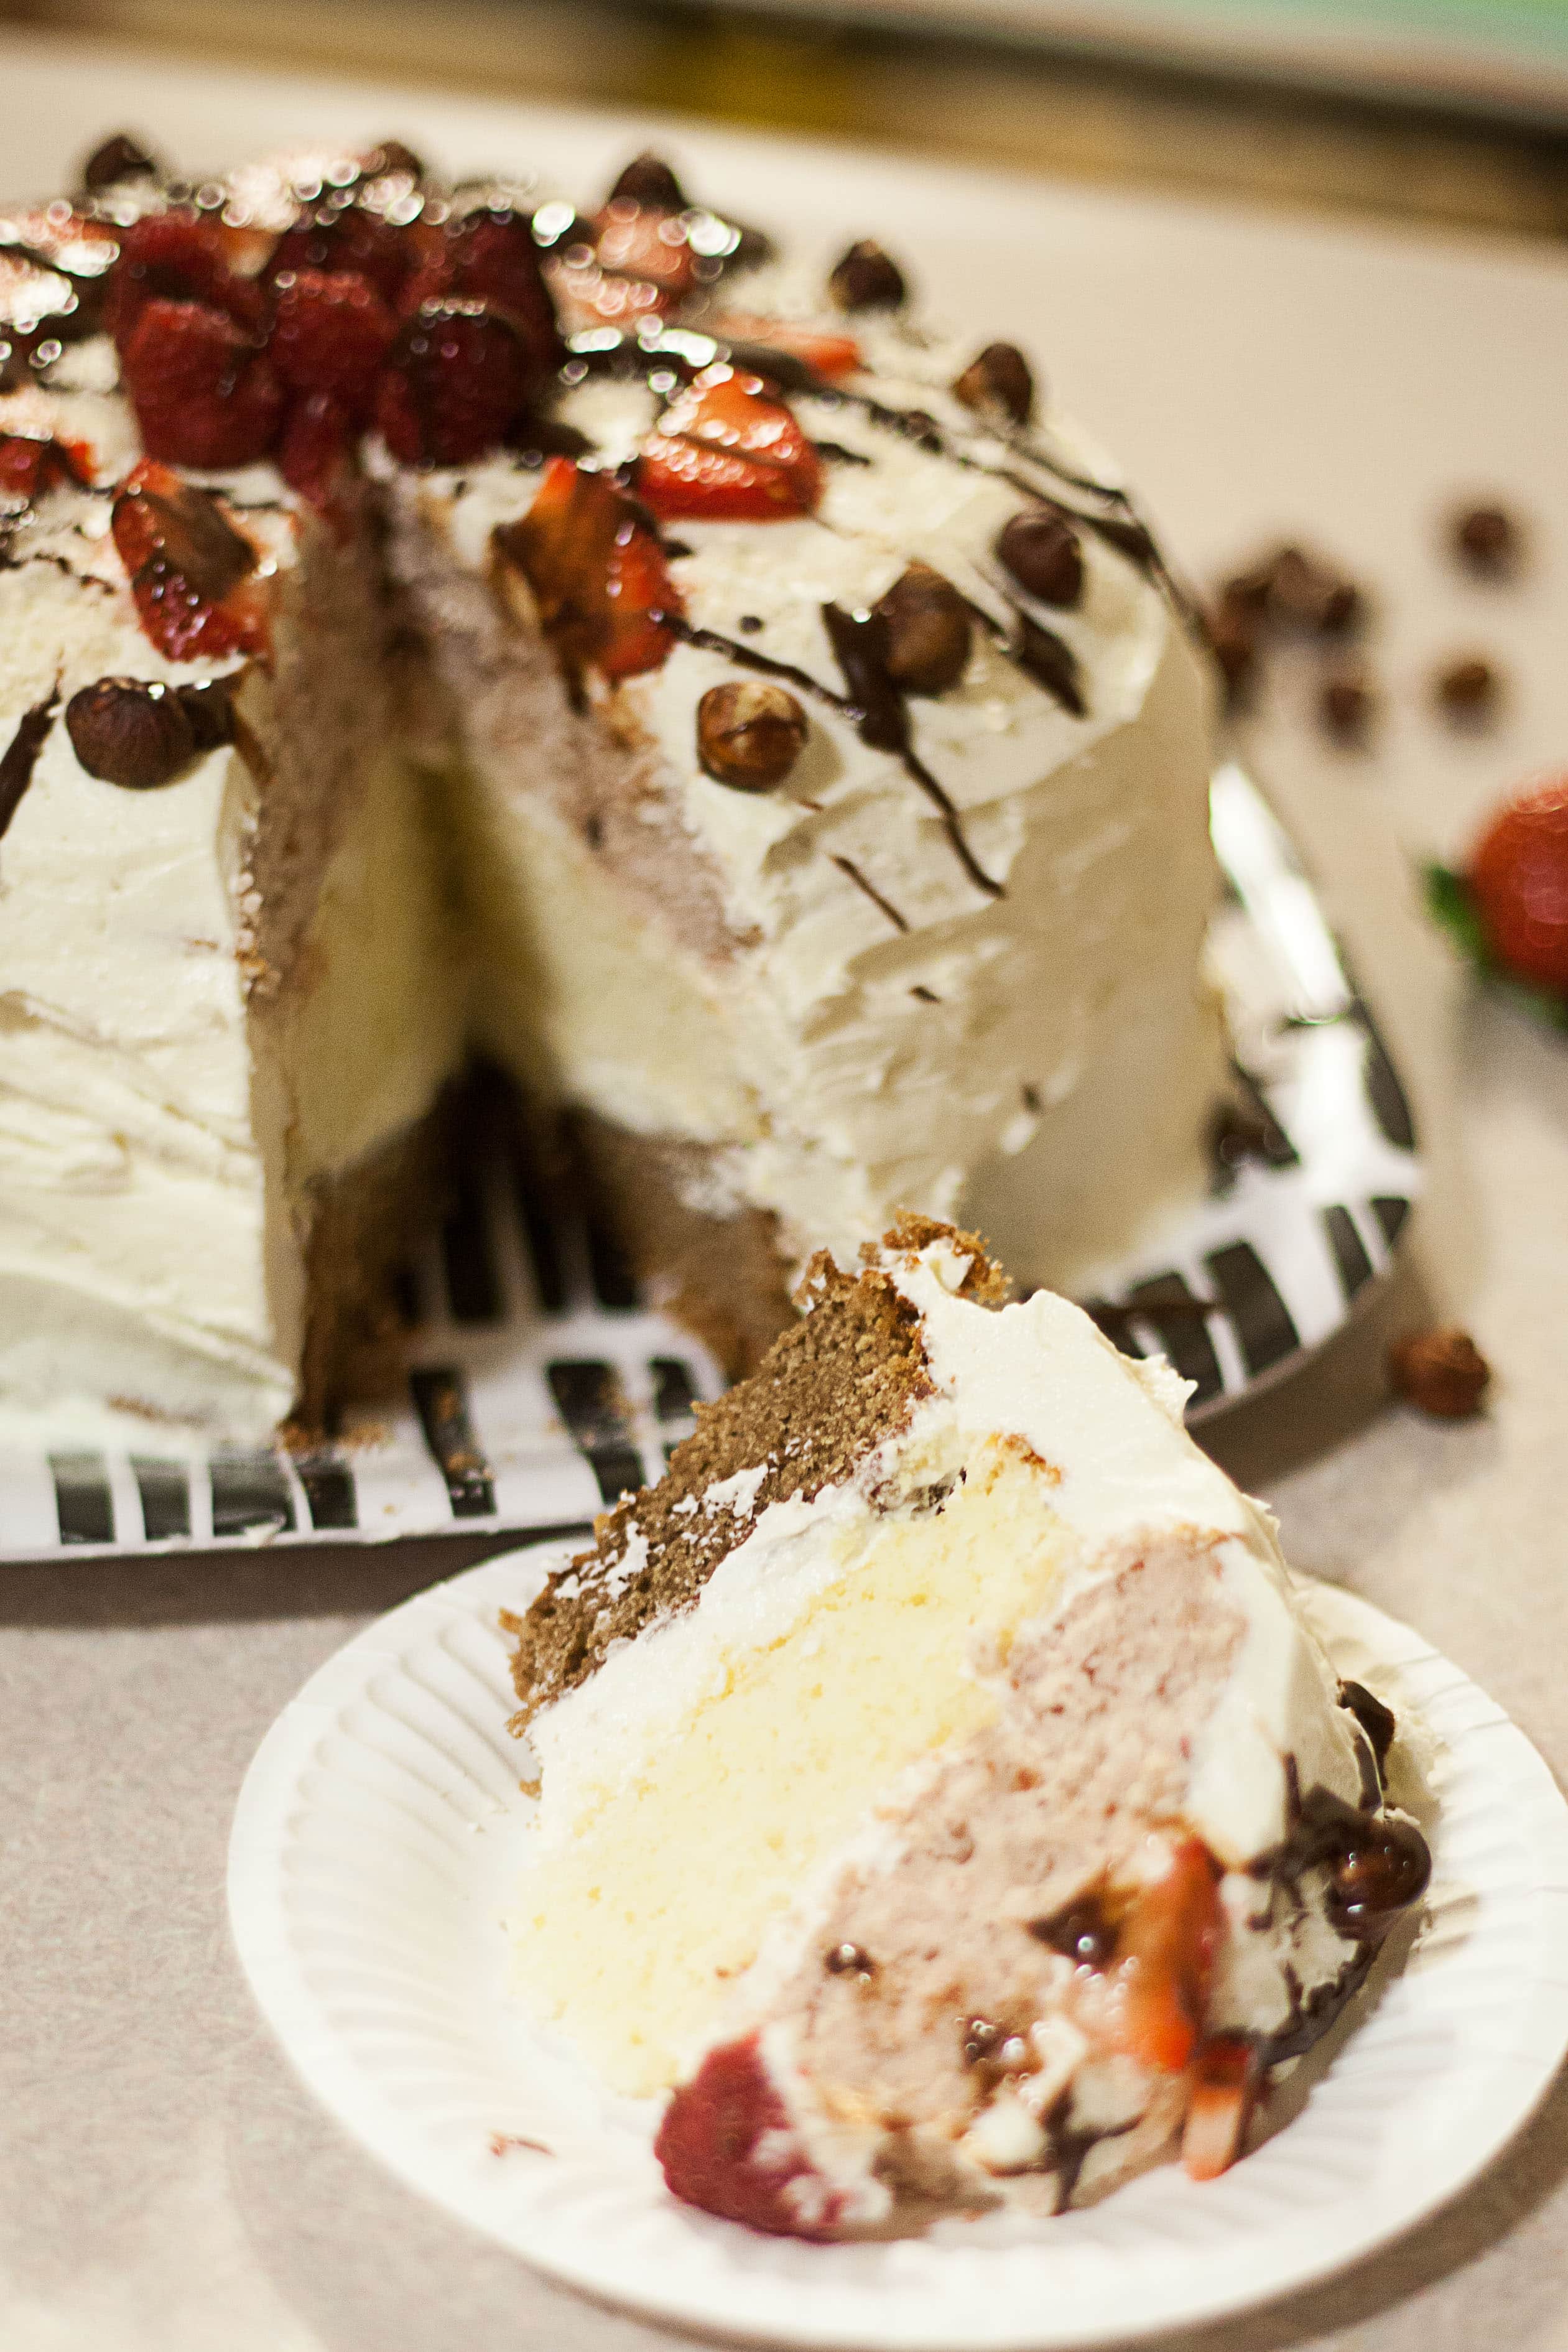 This neapolitan layer cake is the perfect grown up birthday cake, layers are strawberry, nutella, and vanilla, and it is sooo tasty! callmebetty.com